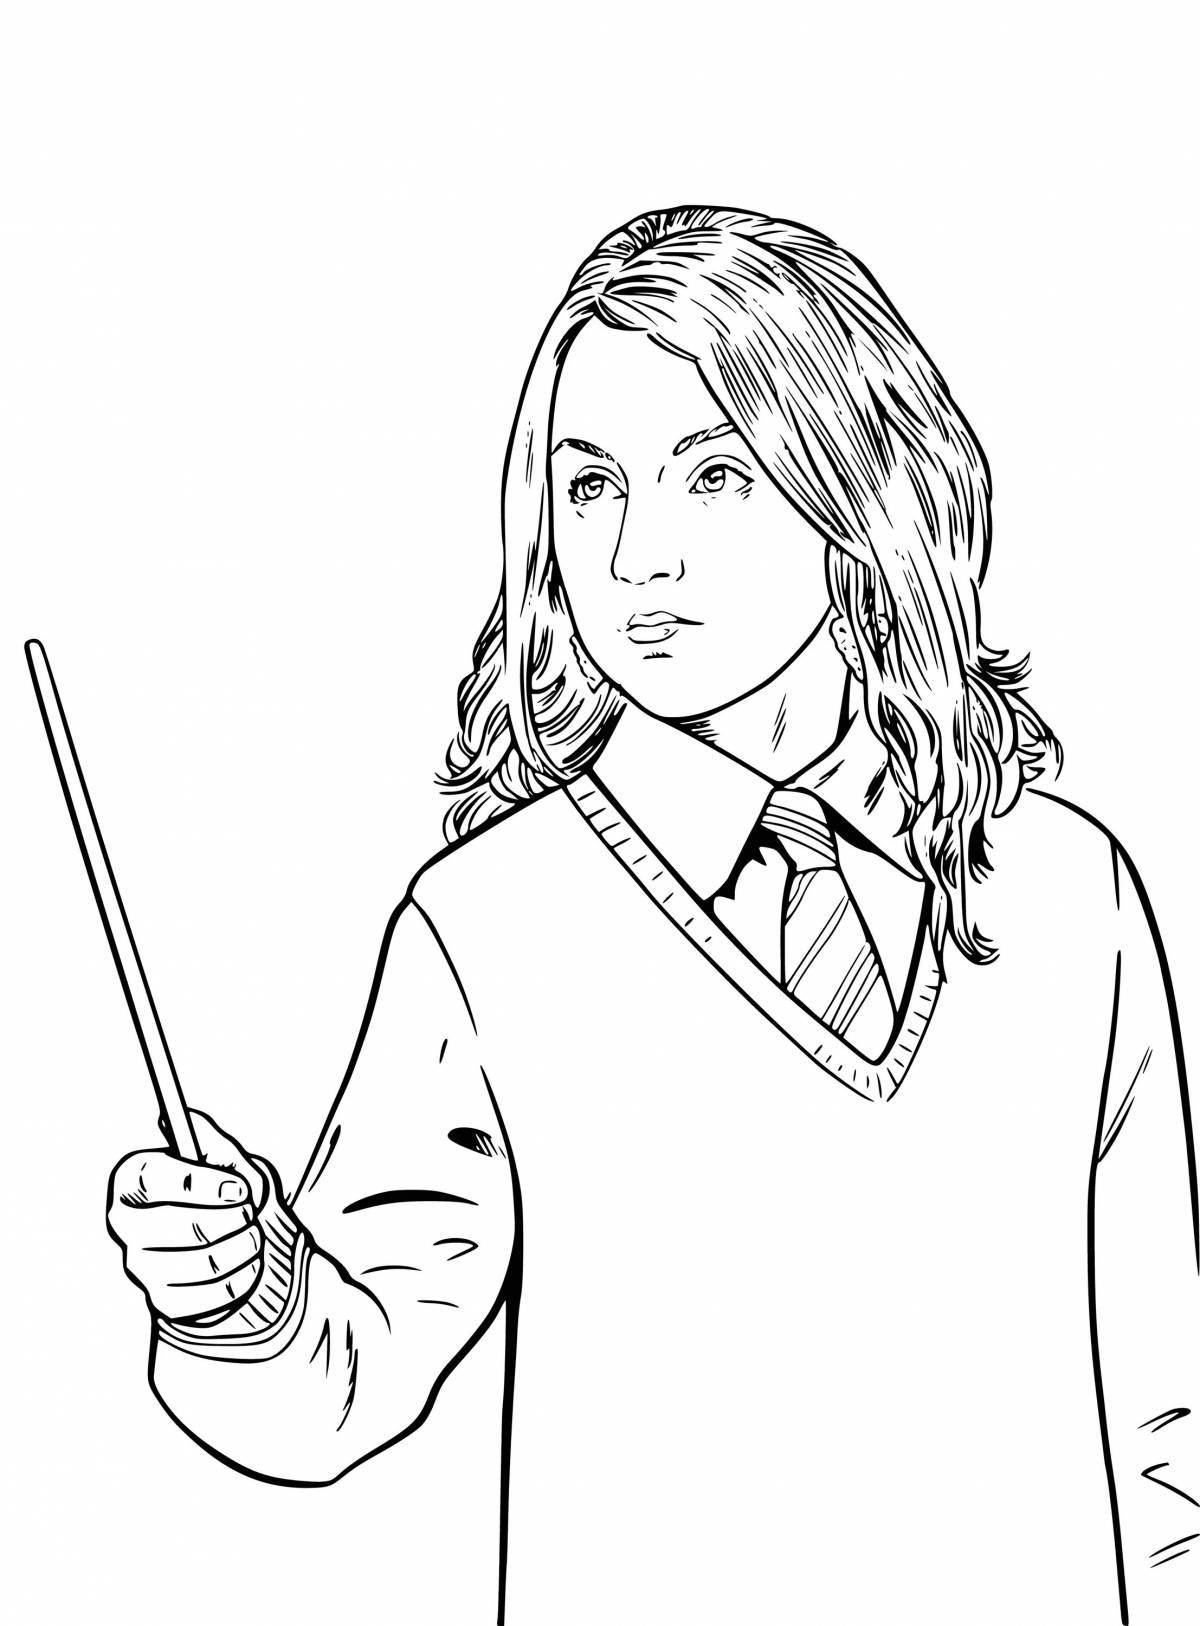 Harry's funny coloring book